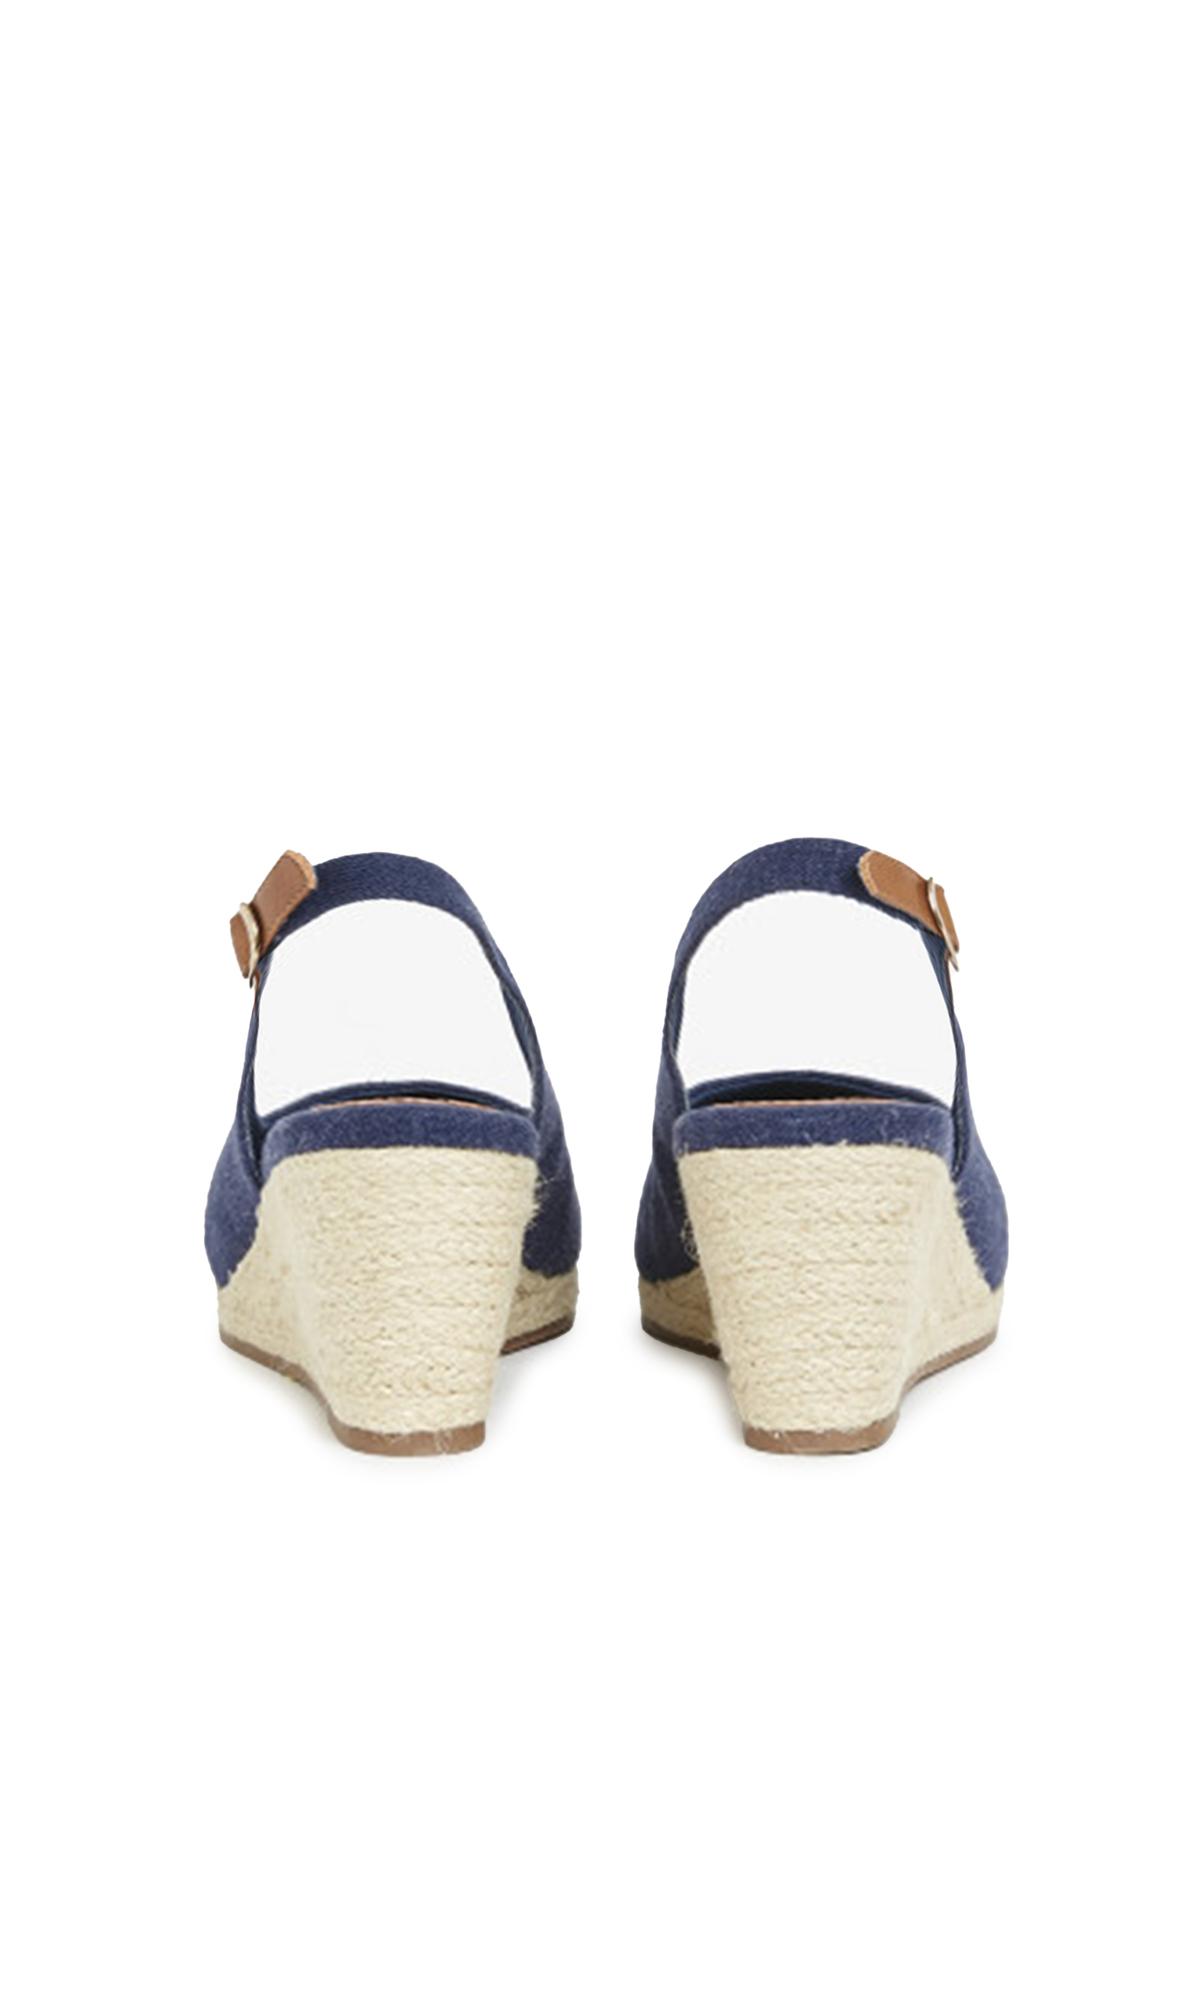 Extra Wide Fit Woven Wedge Slingback Heels Navy 3